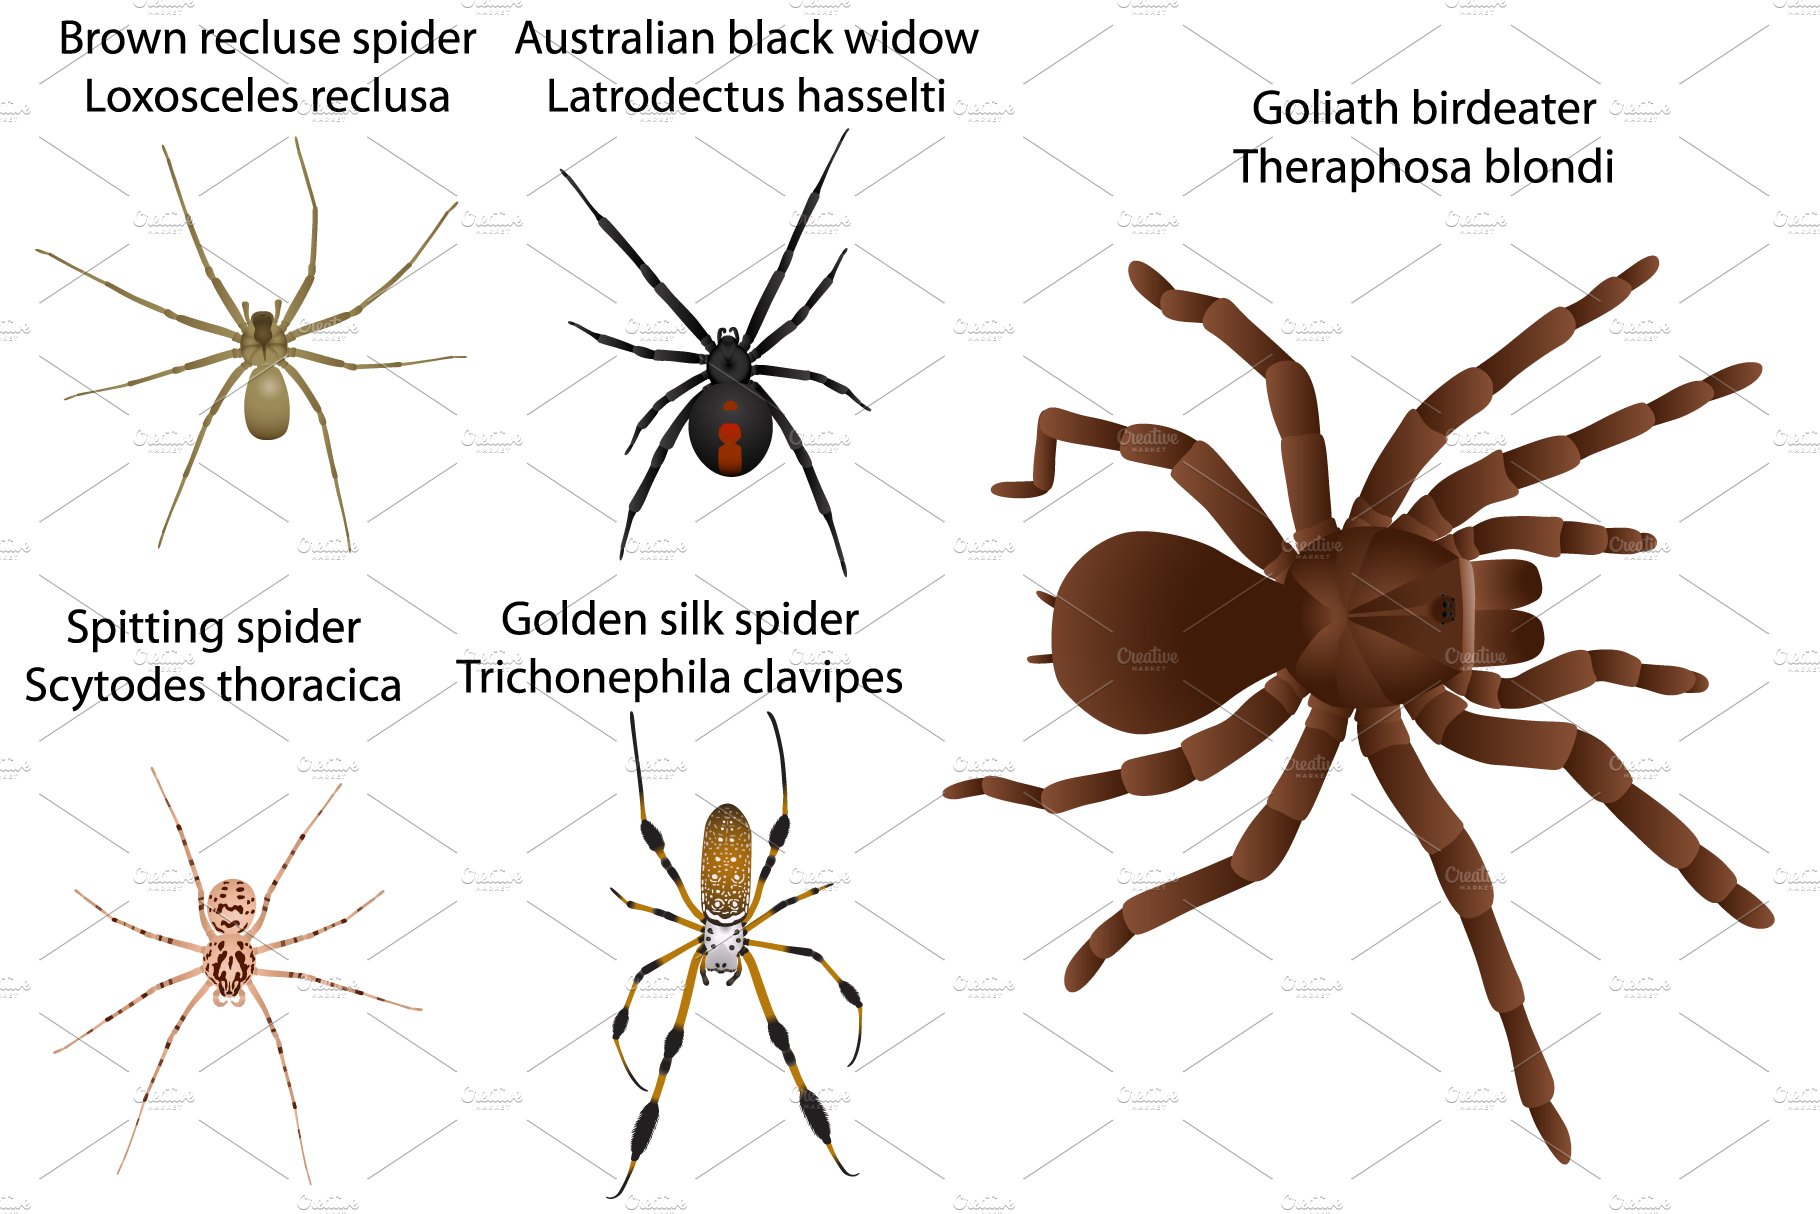 Some options of the spiders.